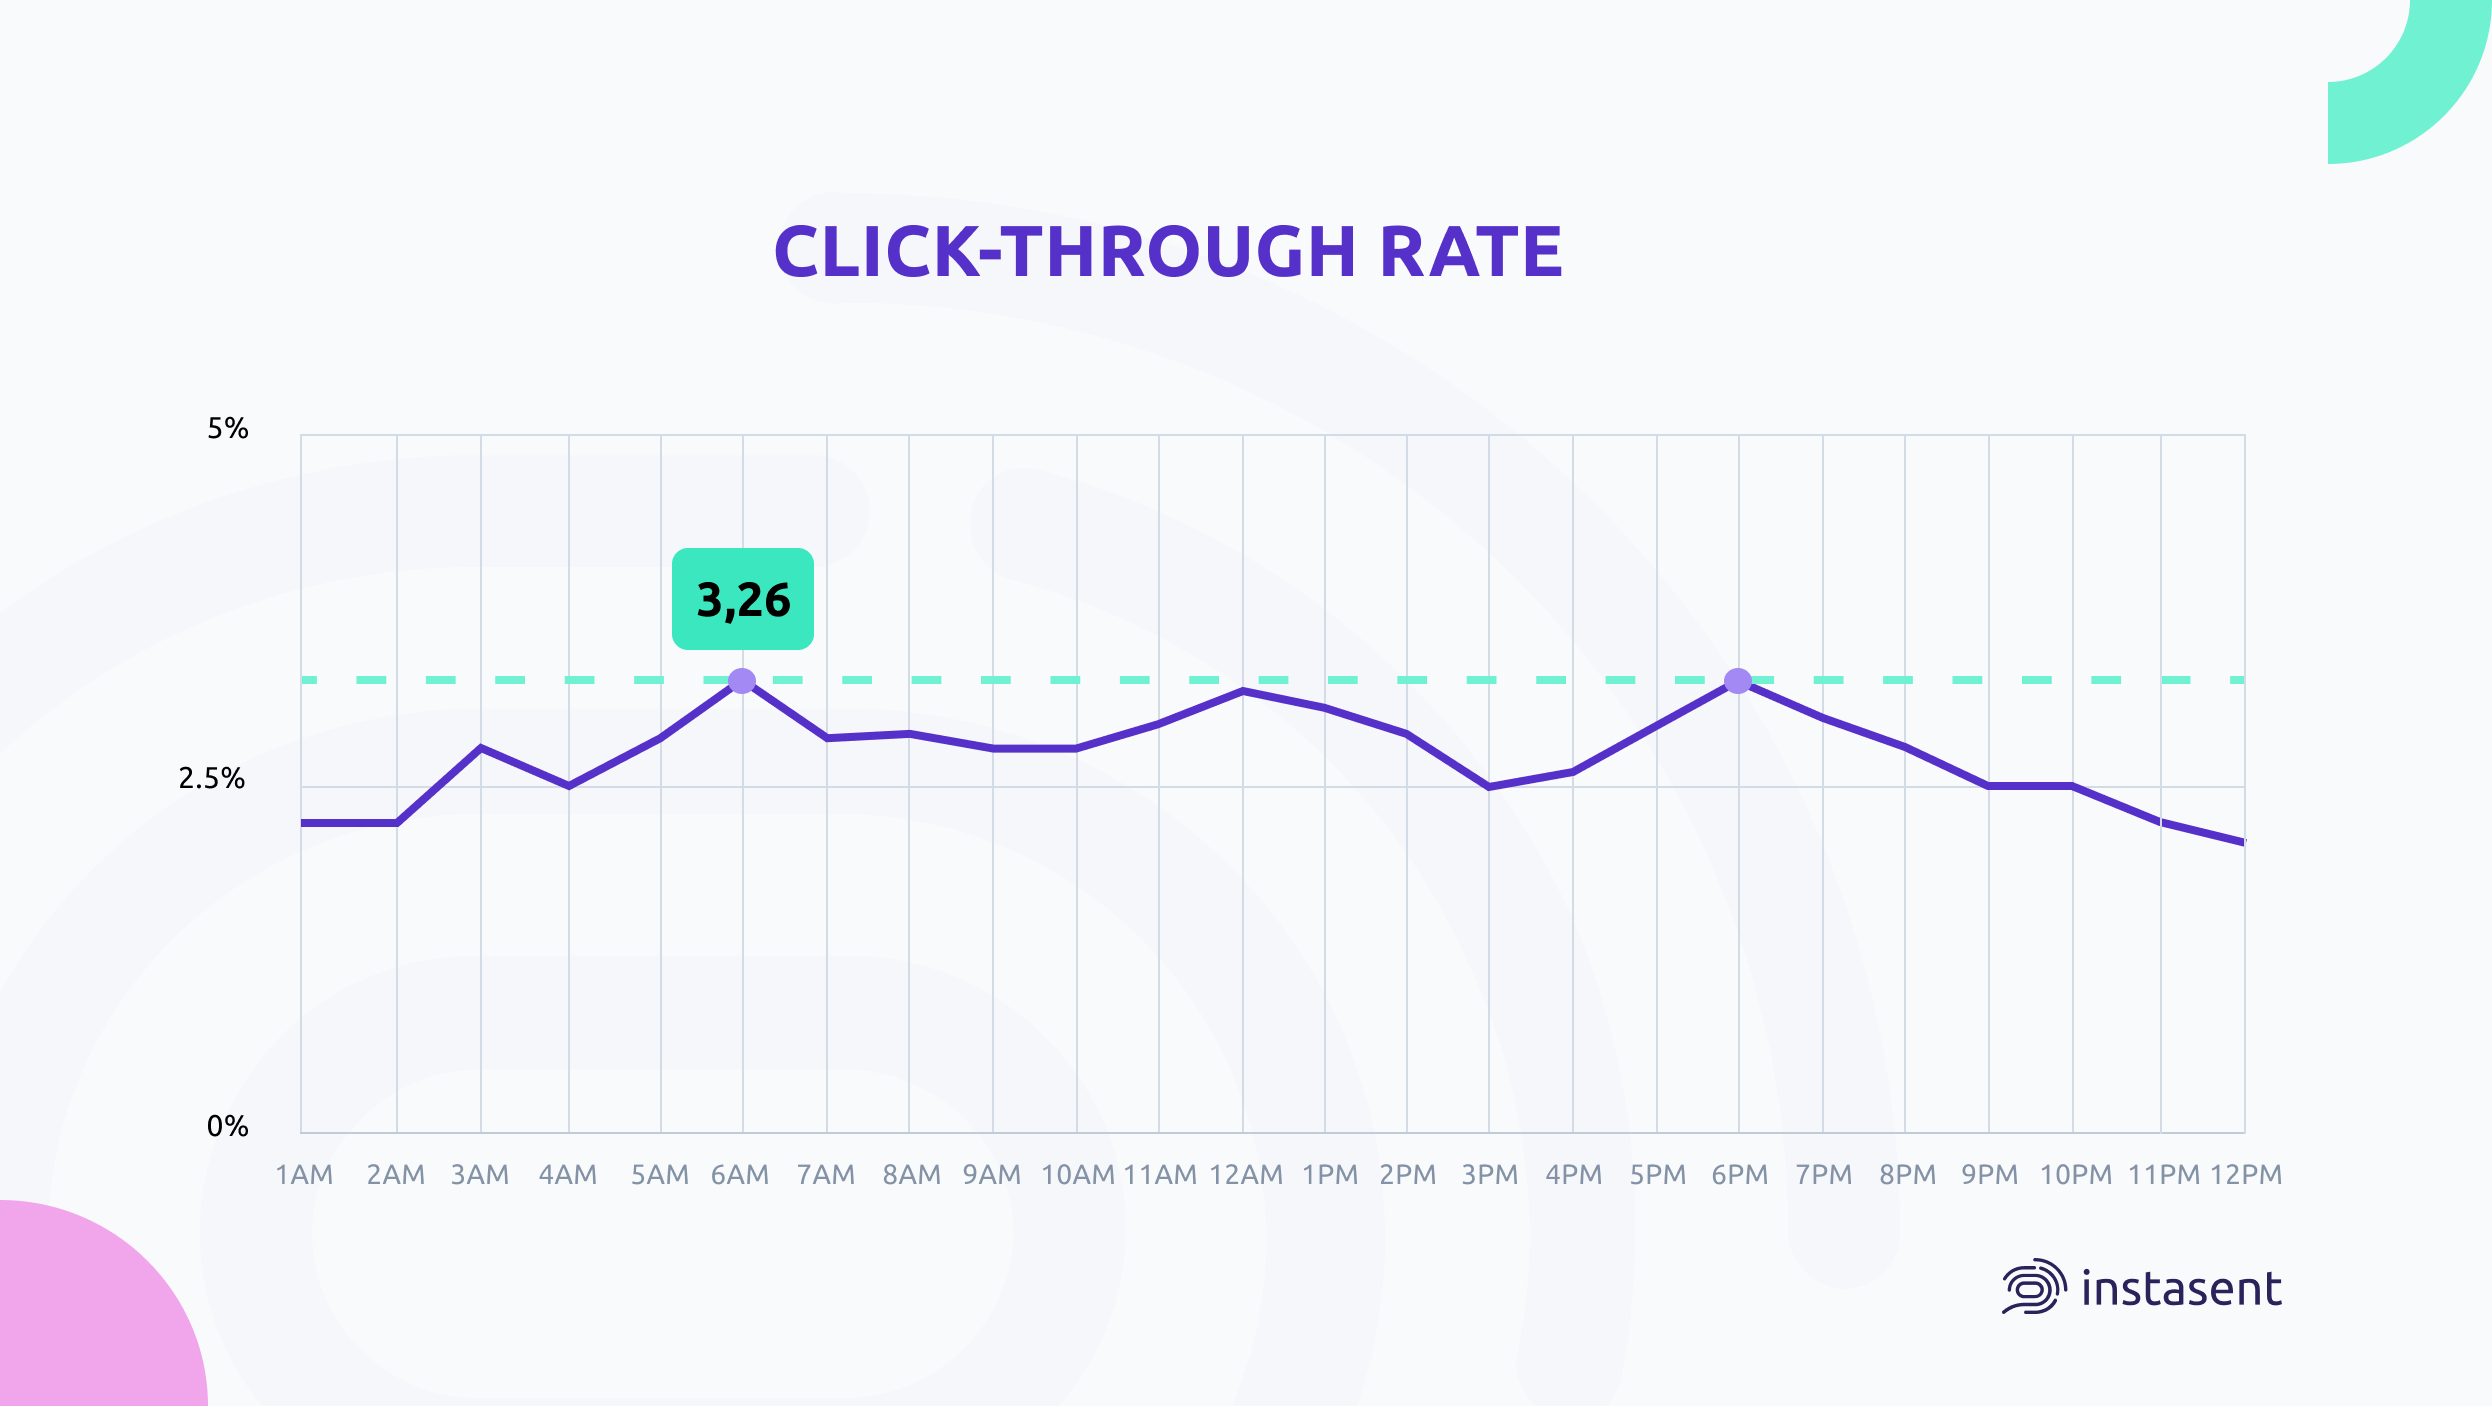 Best Click-Through rate by time